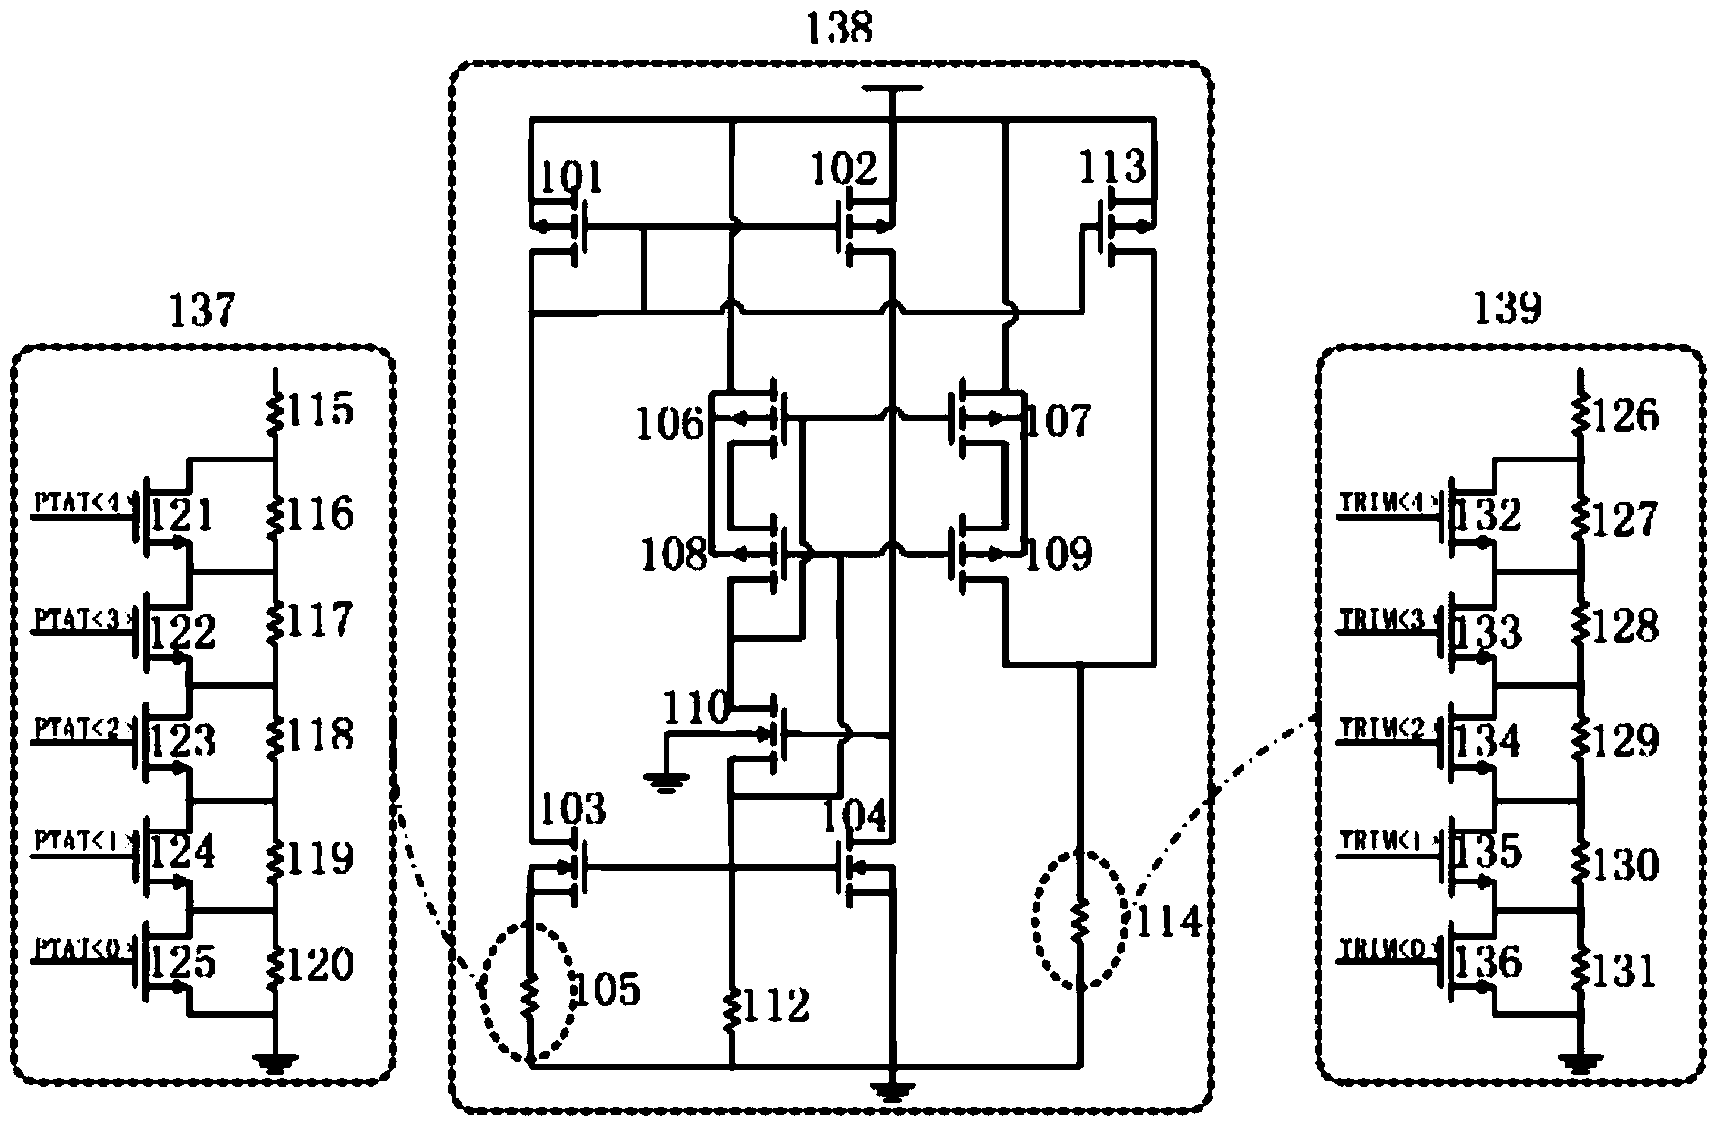 Reference circuit capable of being calibrated and used for UHF RFID label chip